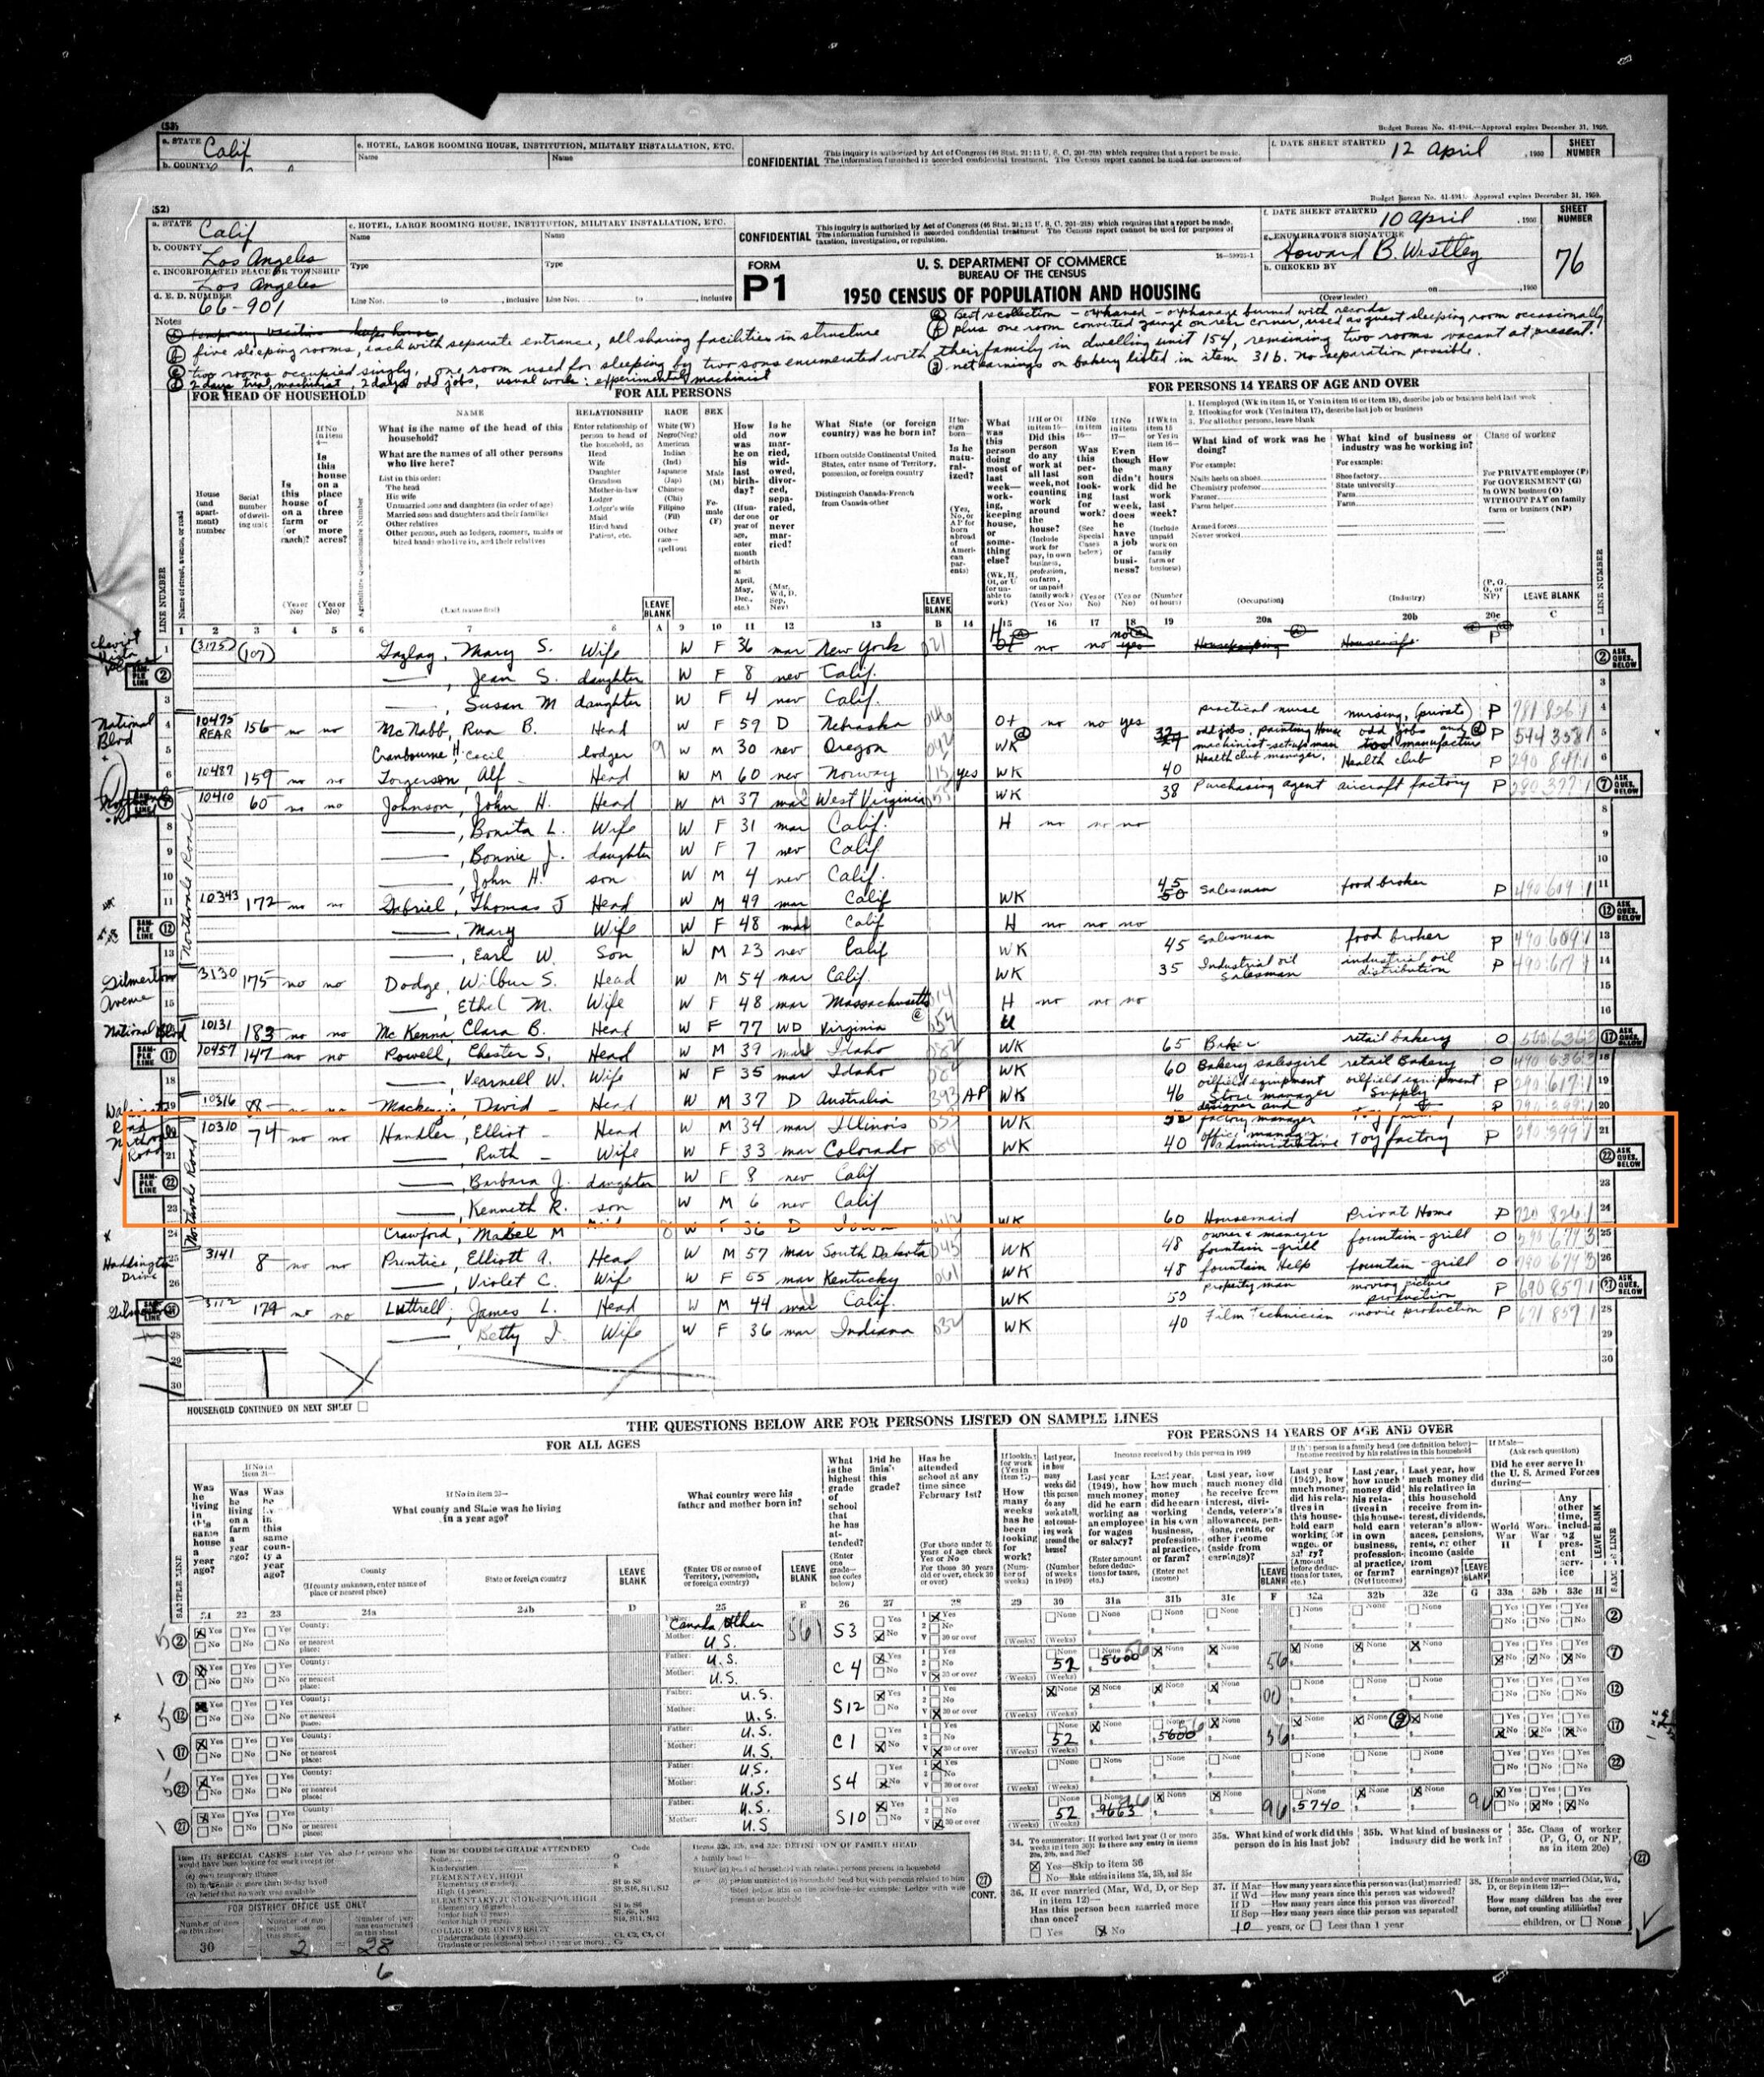 The Handler family in the 1950 U.S. Census